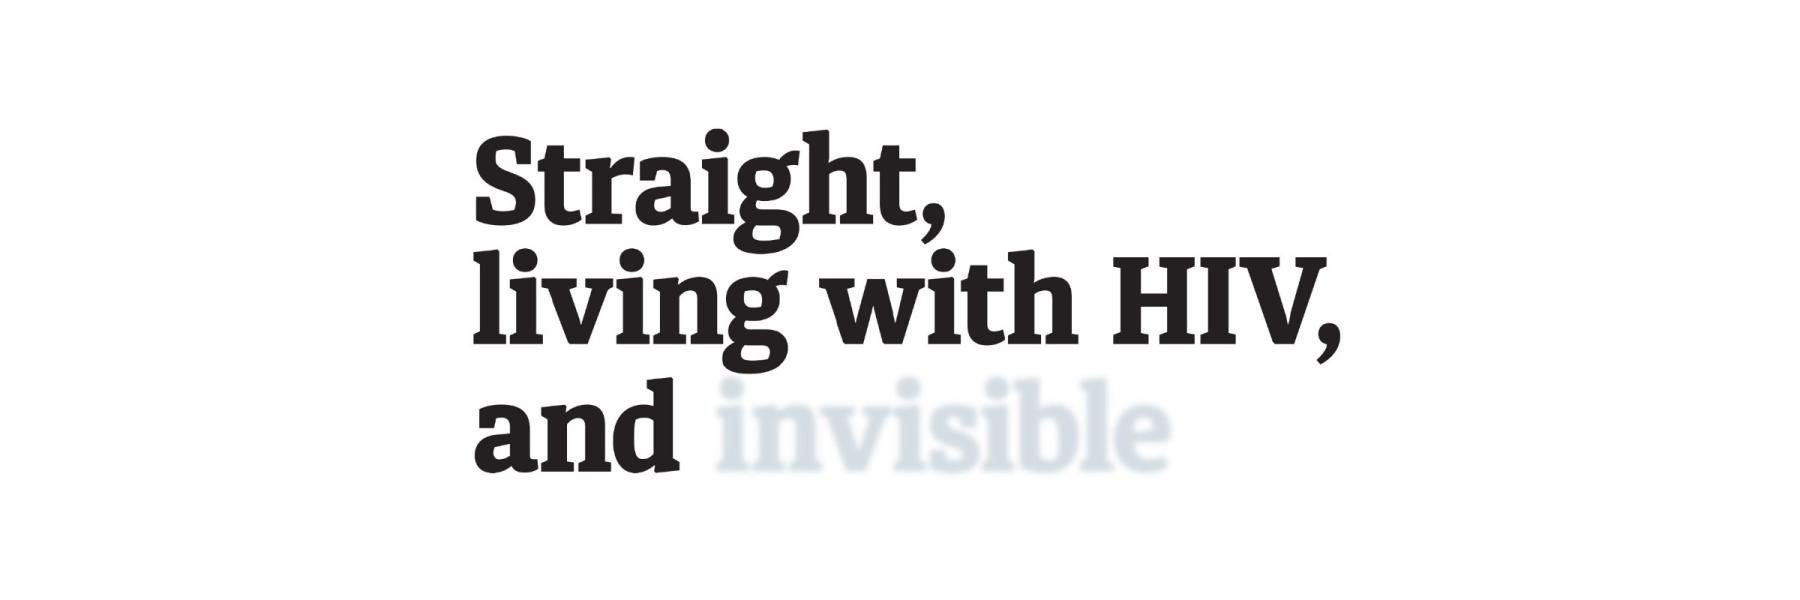 Headline that reads "Straight, living with HIV, and invisible," with the word "invisible" faded out